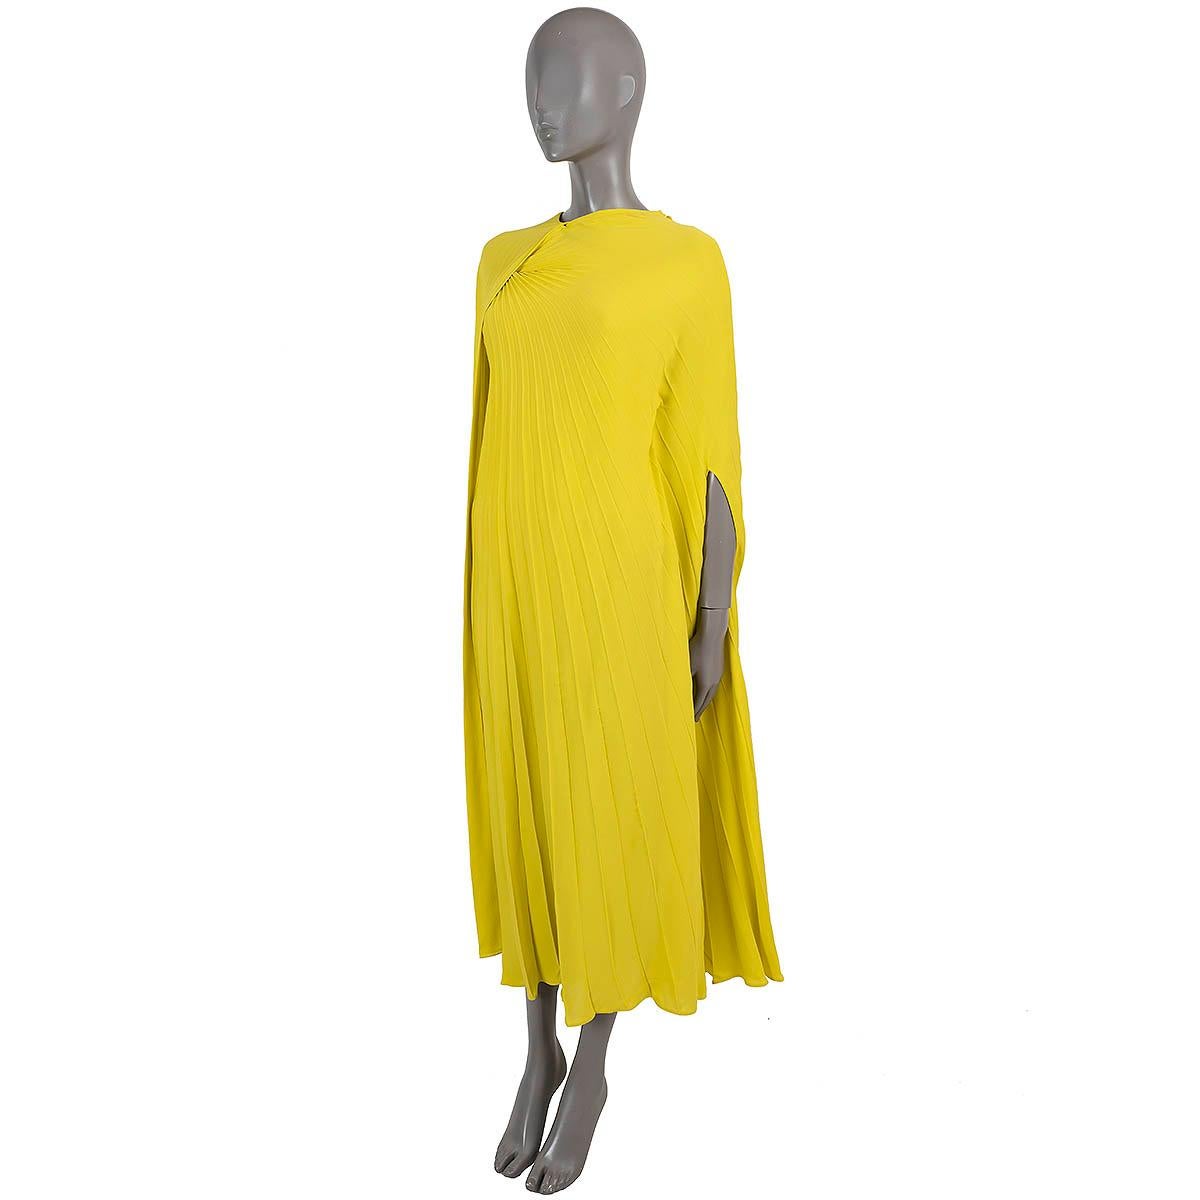 100% authentic Valentino pleated midi dress in chartreuse yellow crepe silk (100%). Features a cape-effect overlay that falls over the shoulders and flows beautifully as you walk. Opens with a concealed zipper in the back and comes with a nude body